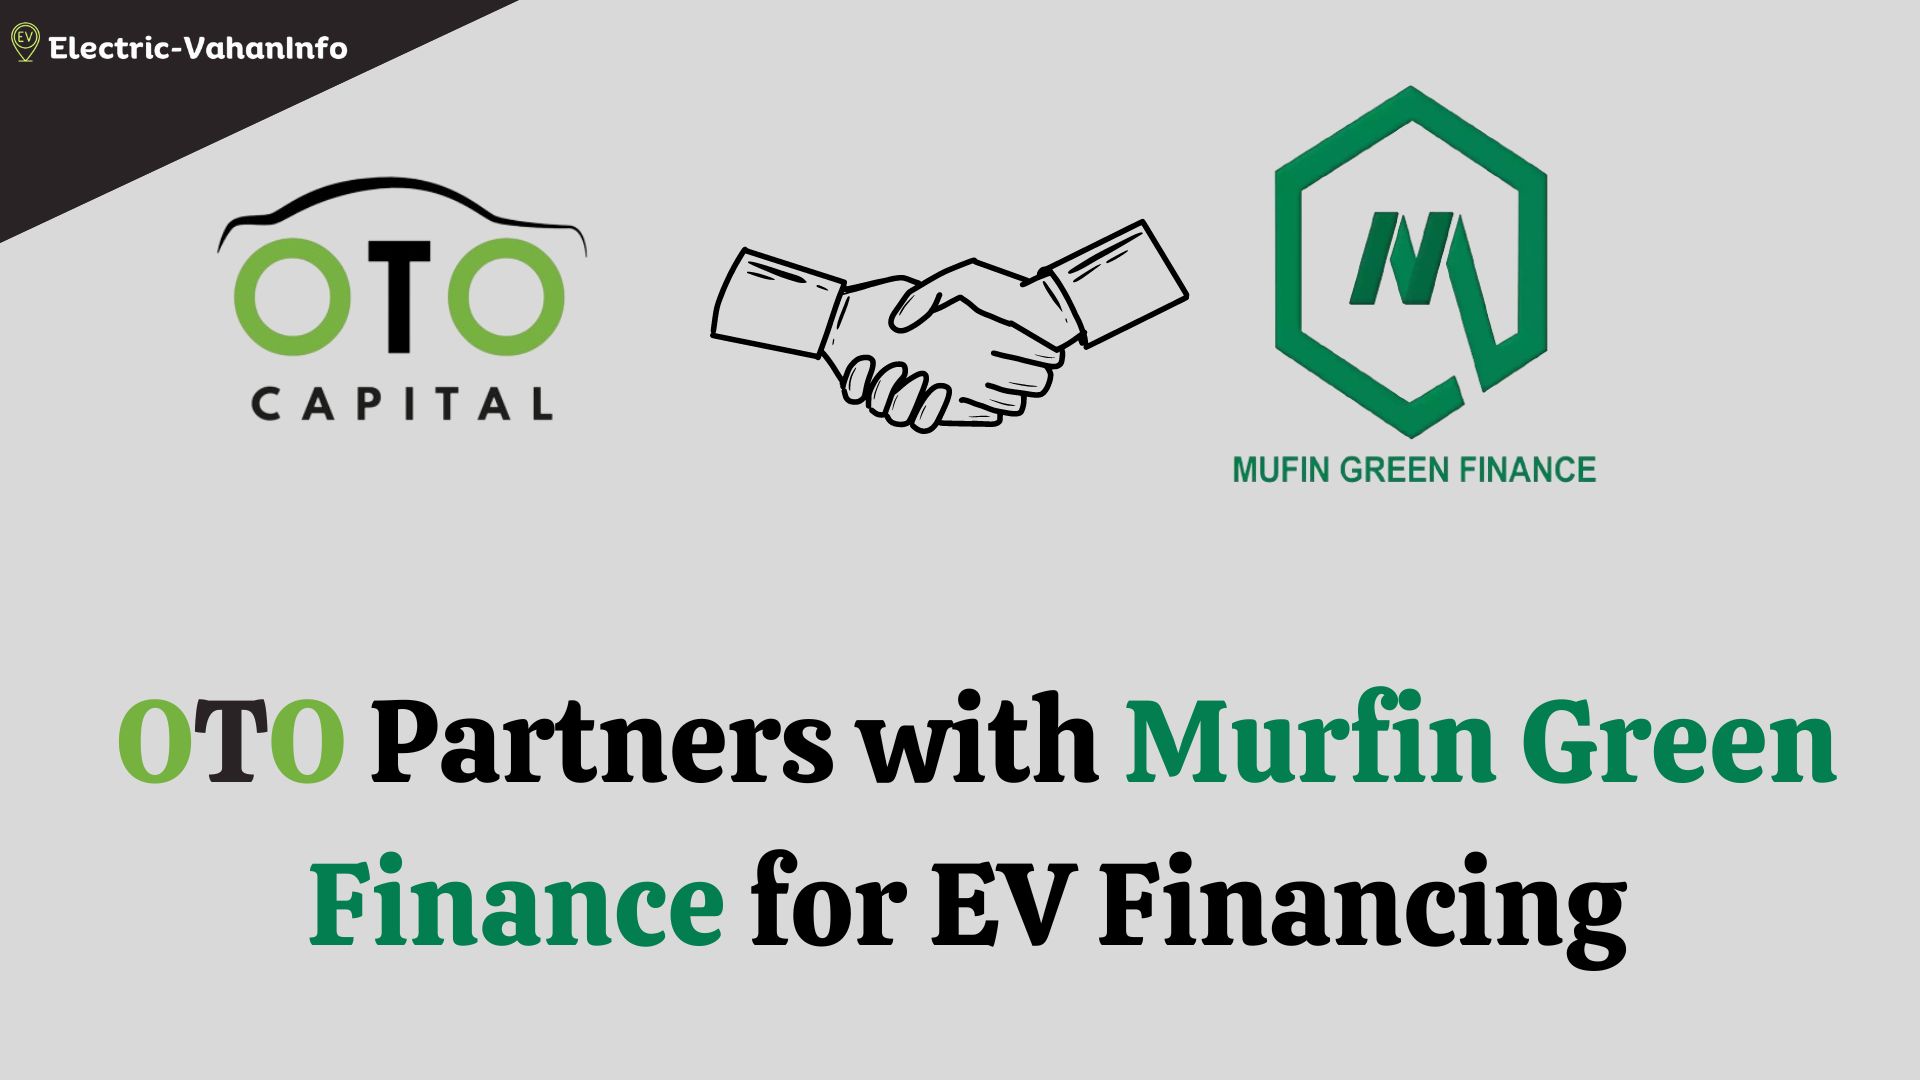 https://electric-vahaninfo.com/oto-partners-with-murfin-green-finance-for-ev-financing/